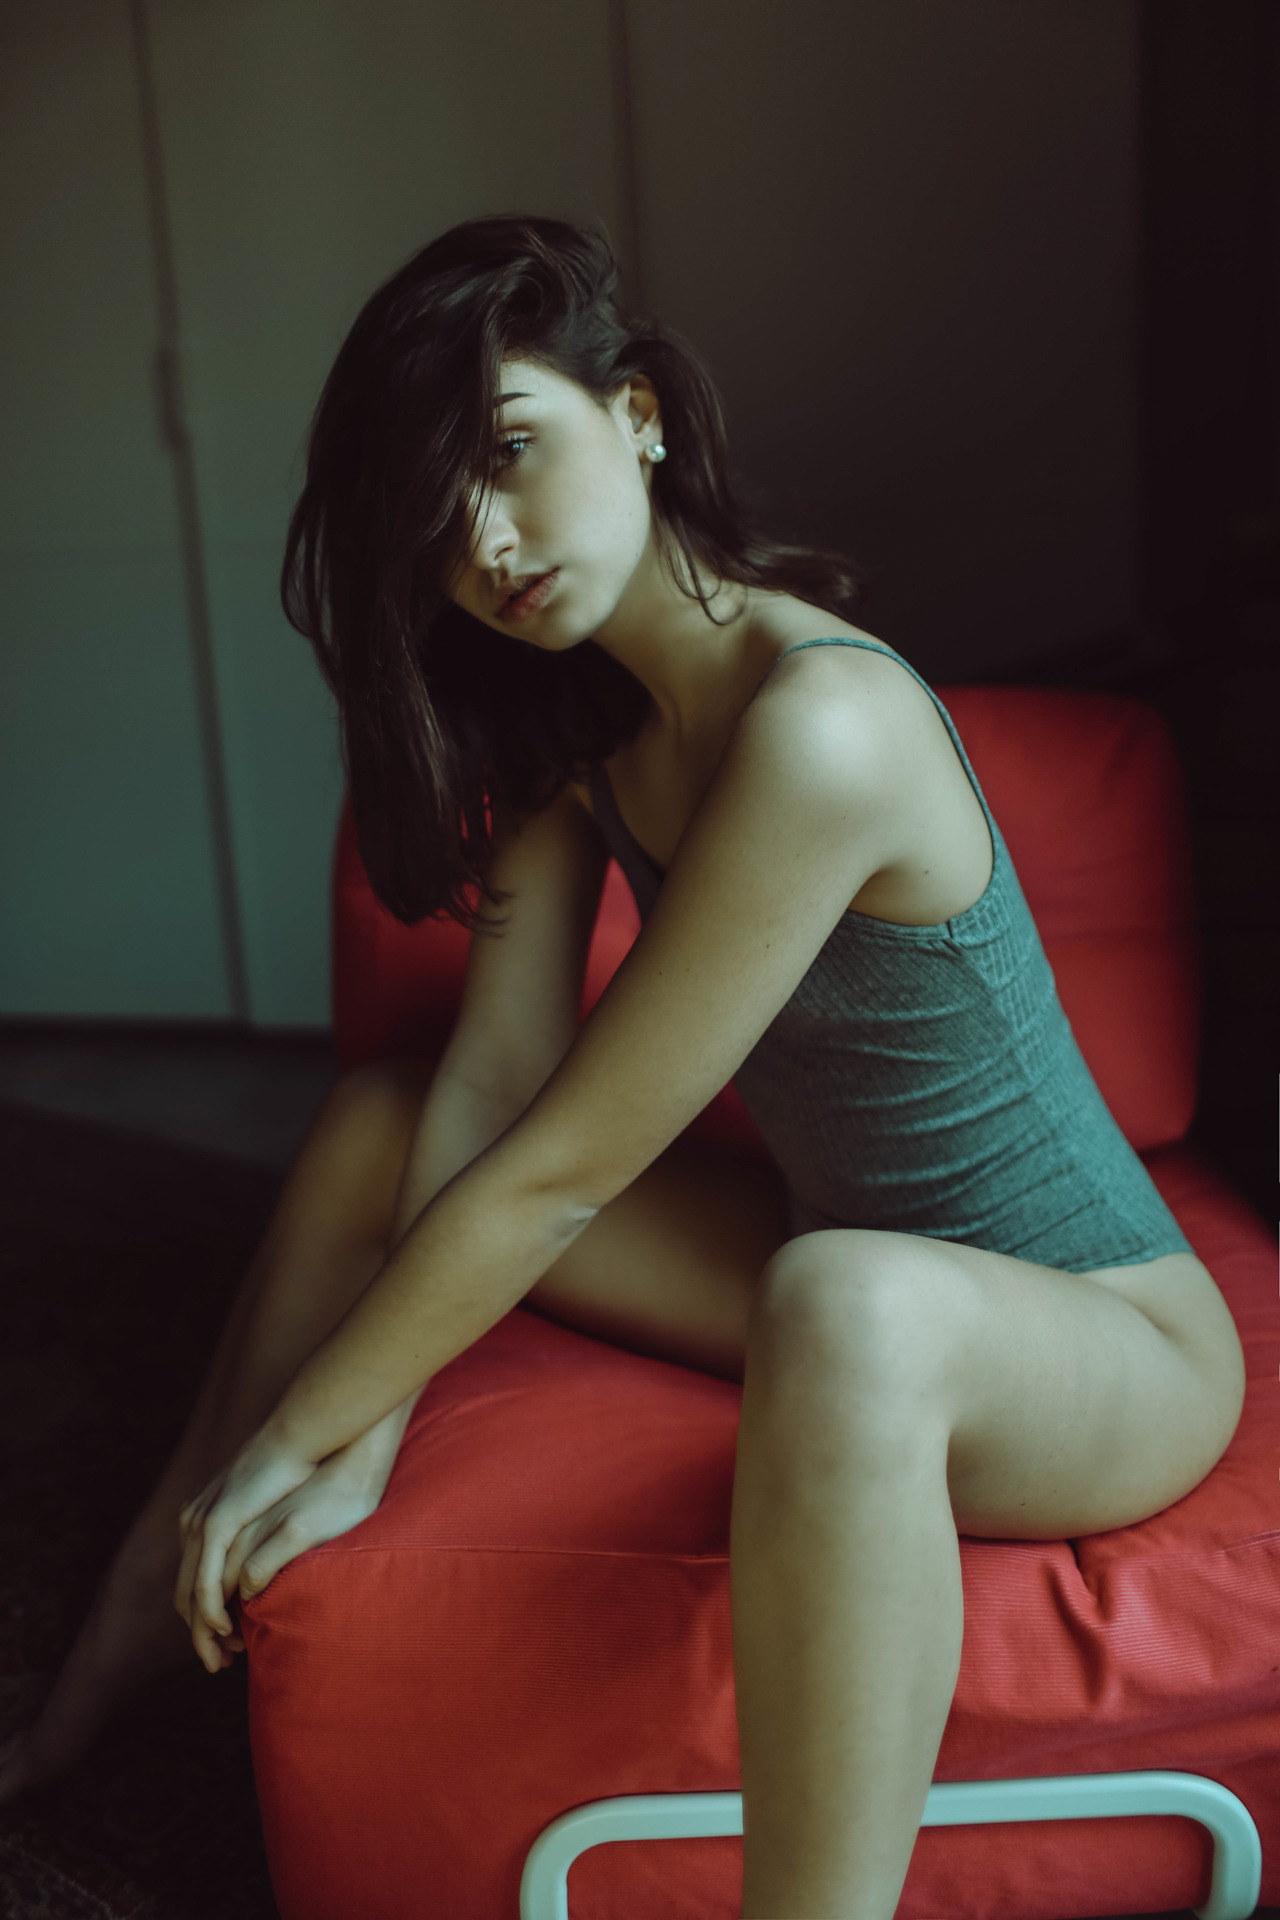 b-authentique:  Julia by Stefano Bosso  Keep reading